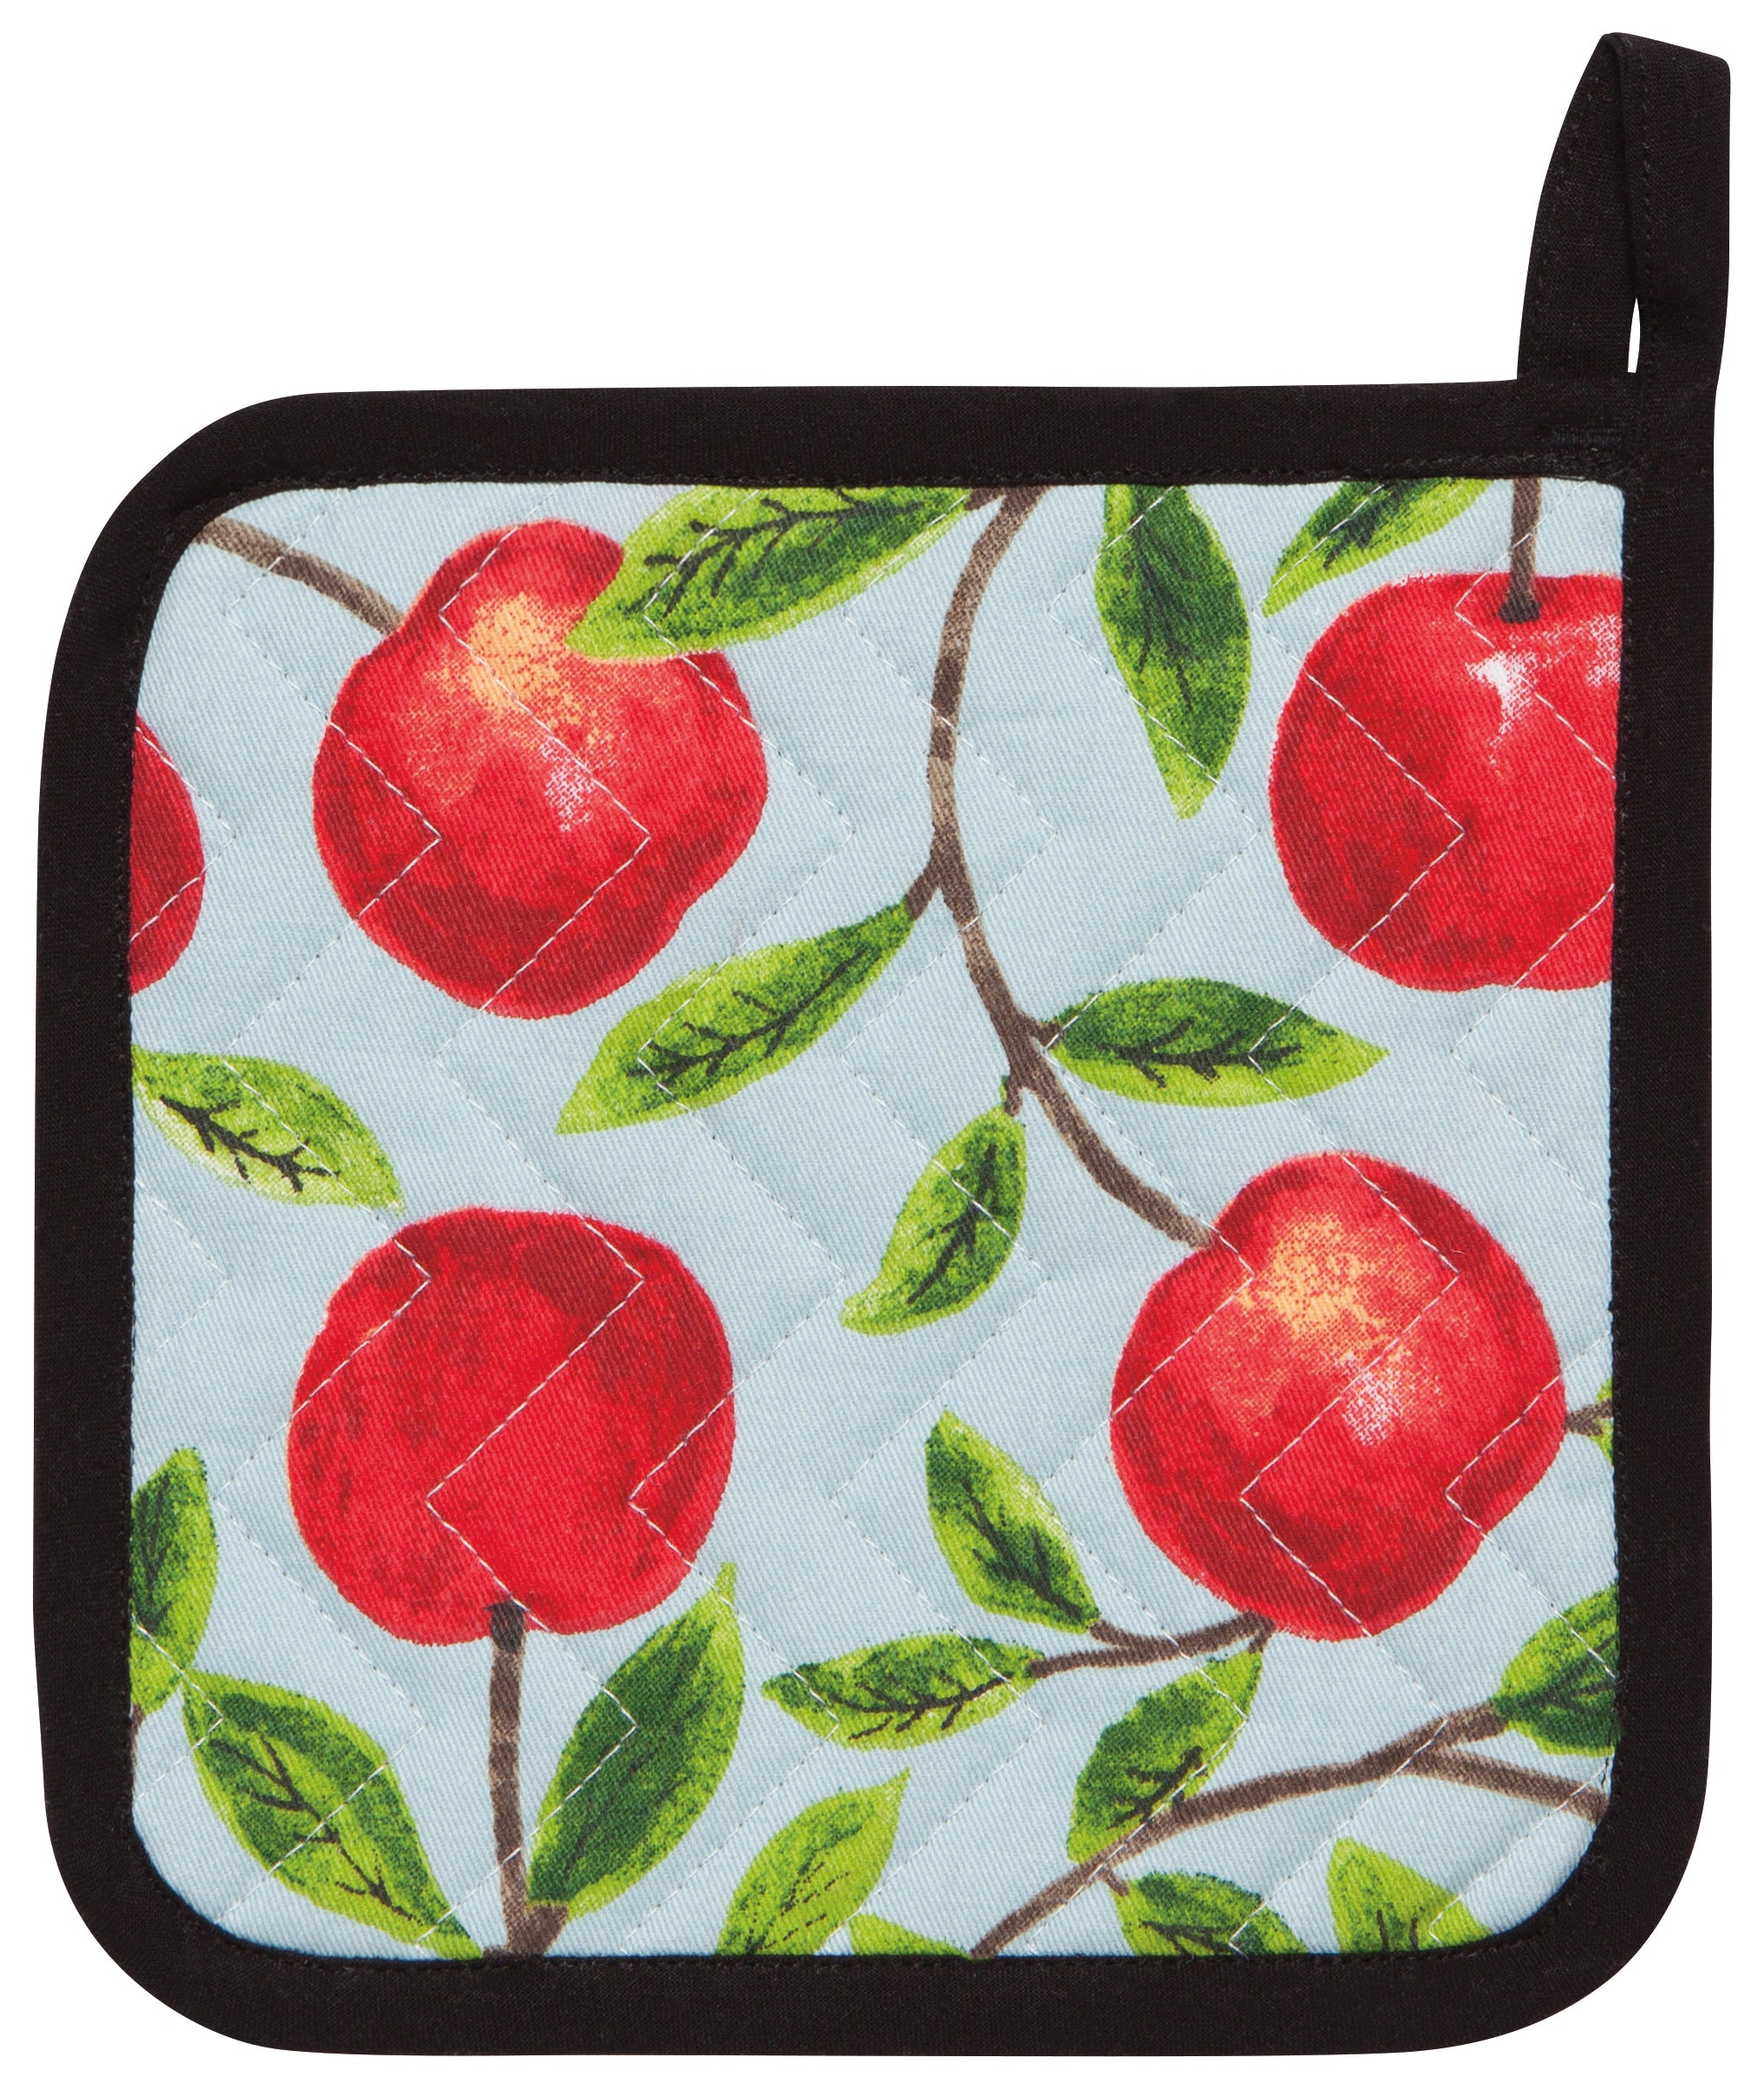 Orchard Quilted Pot Holder | Now Designs